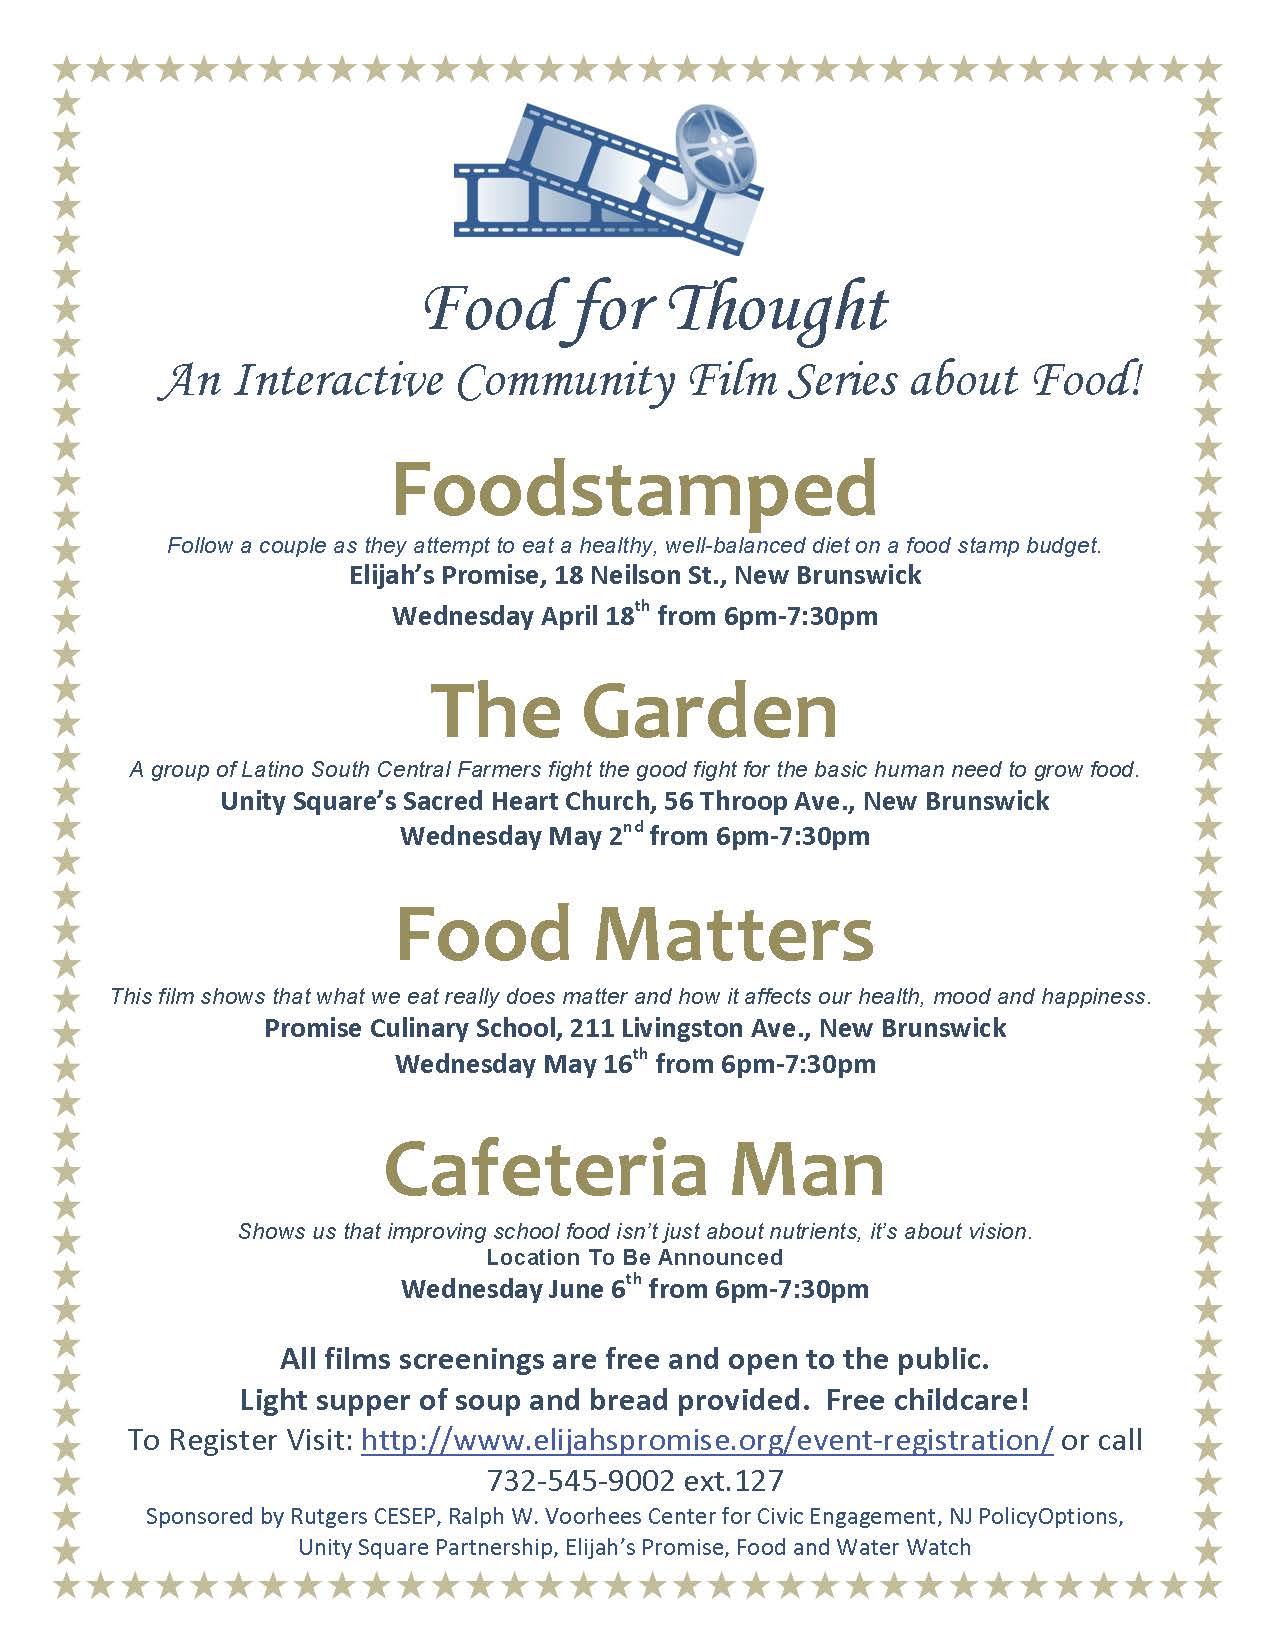 Food for Thought - Film Series